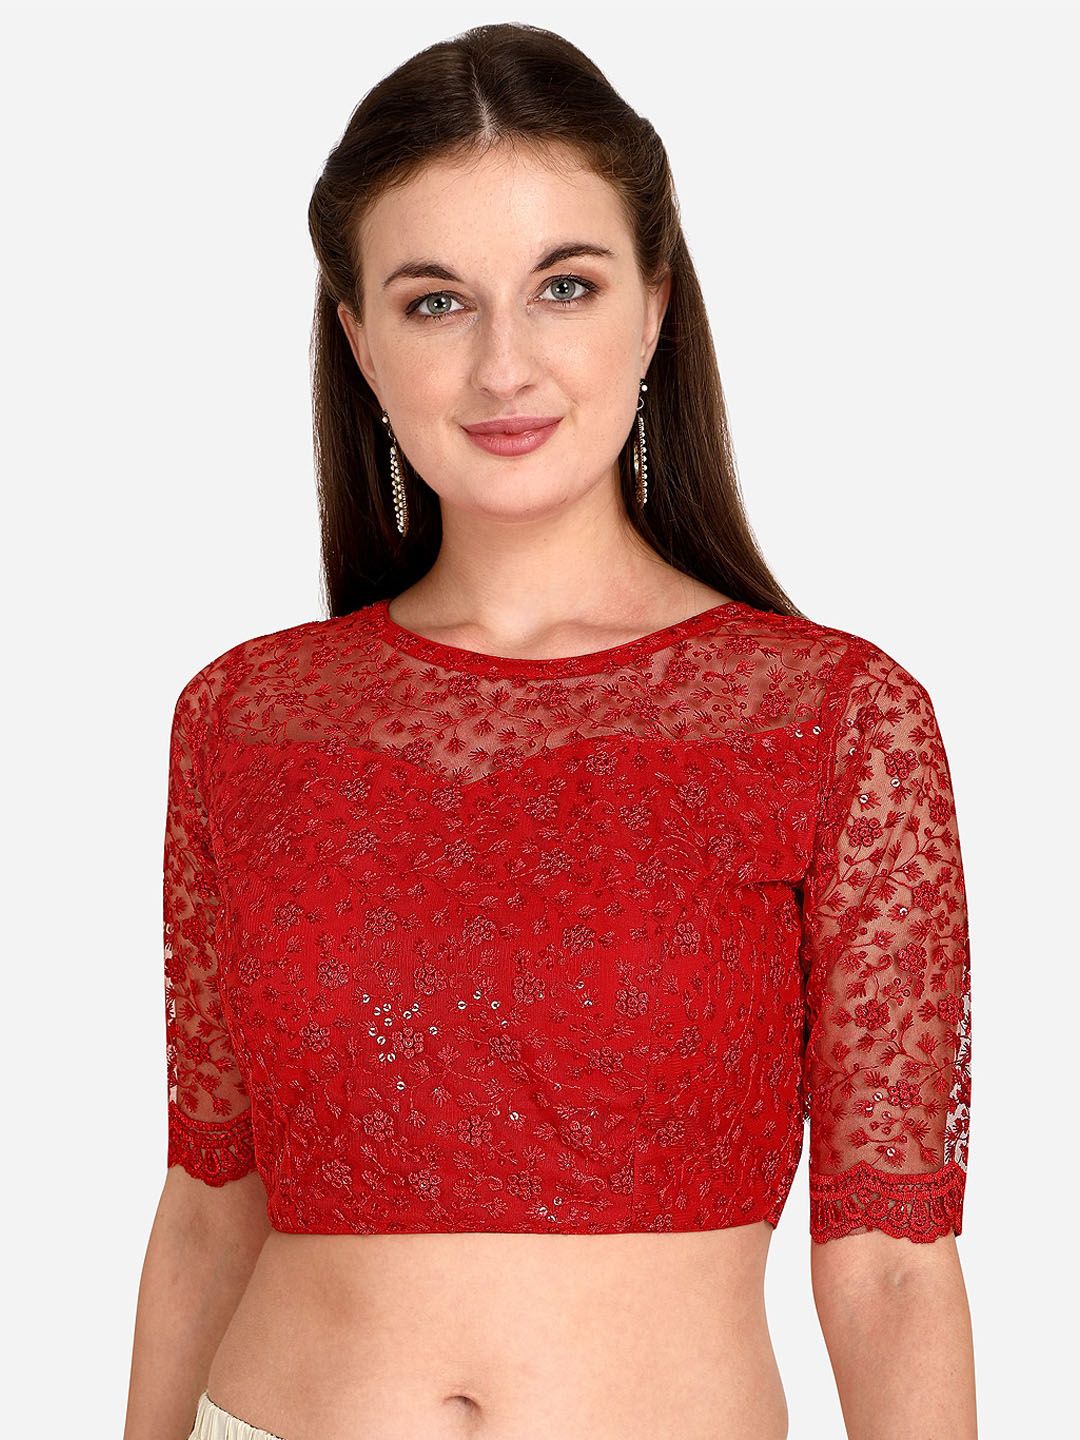 Amrutam Fab Women Red Sequined Embroidered Saree Blouse Price in India